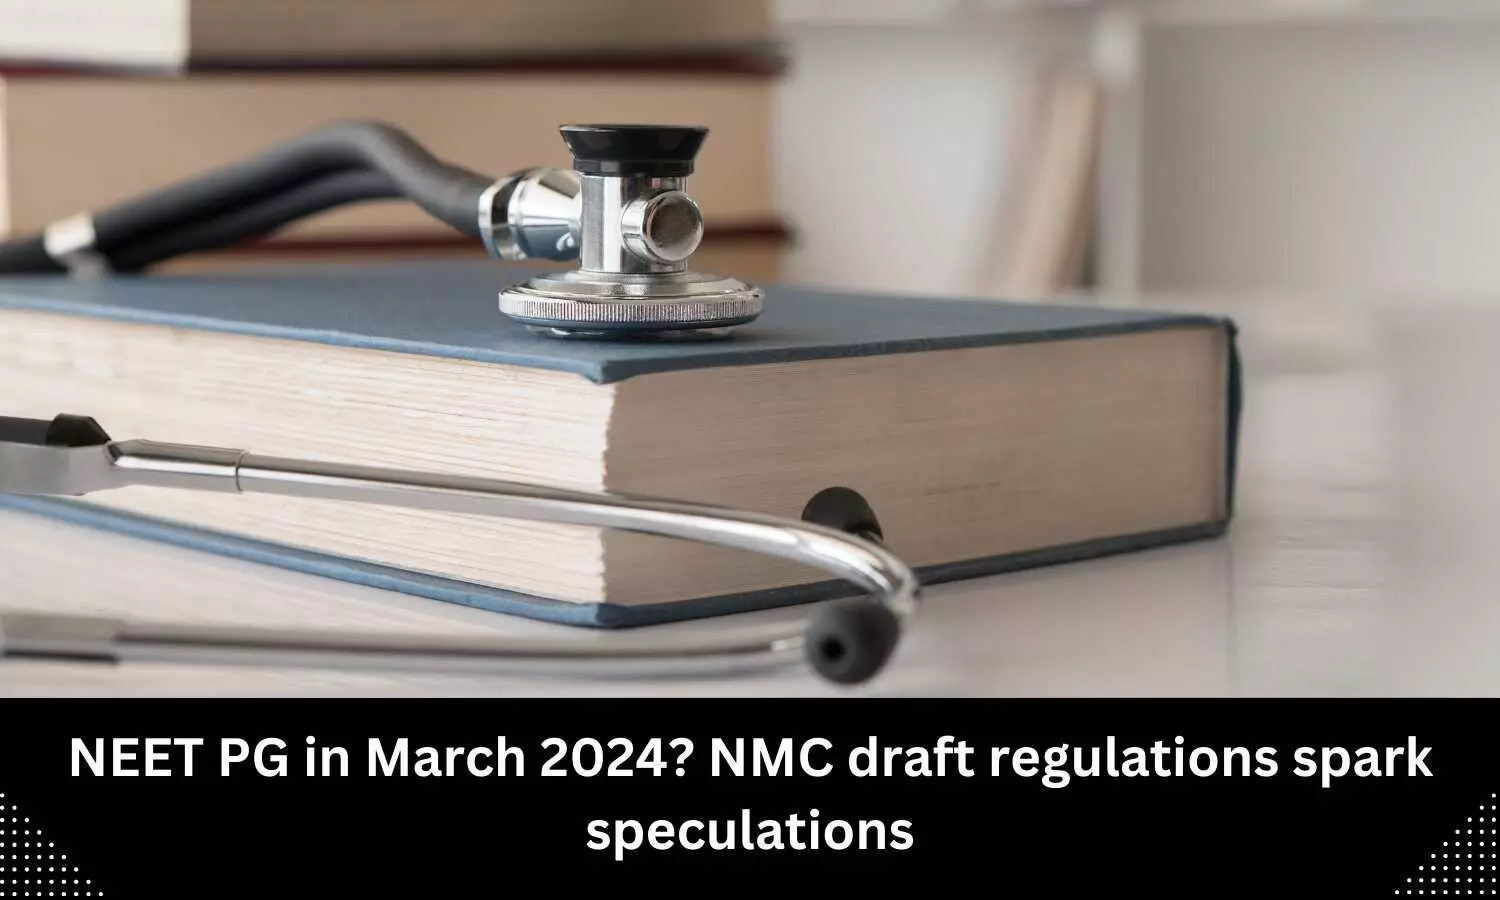 NEET PG in March 2024? NMC draft regulations spark speculations